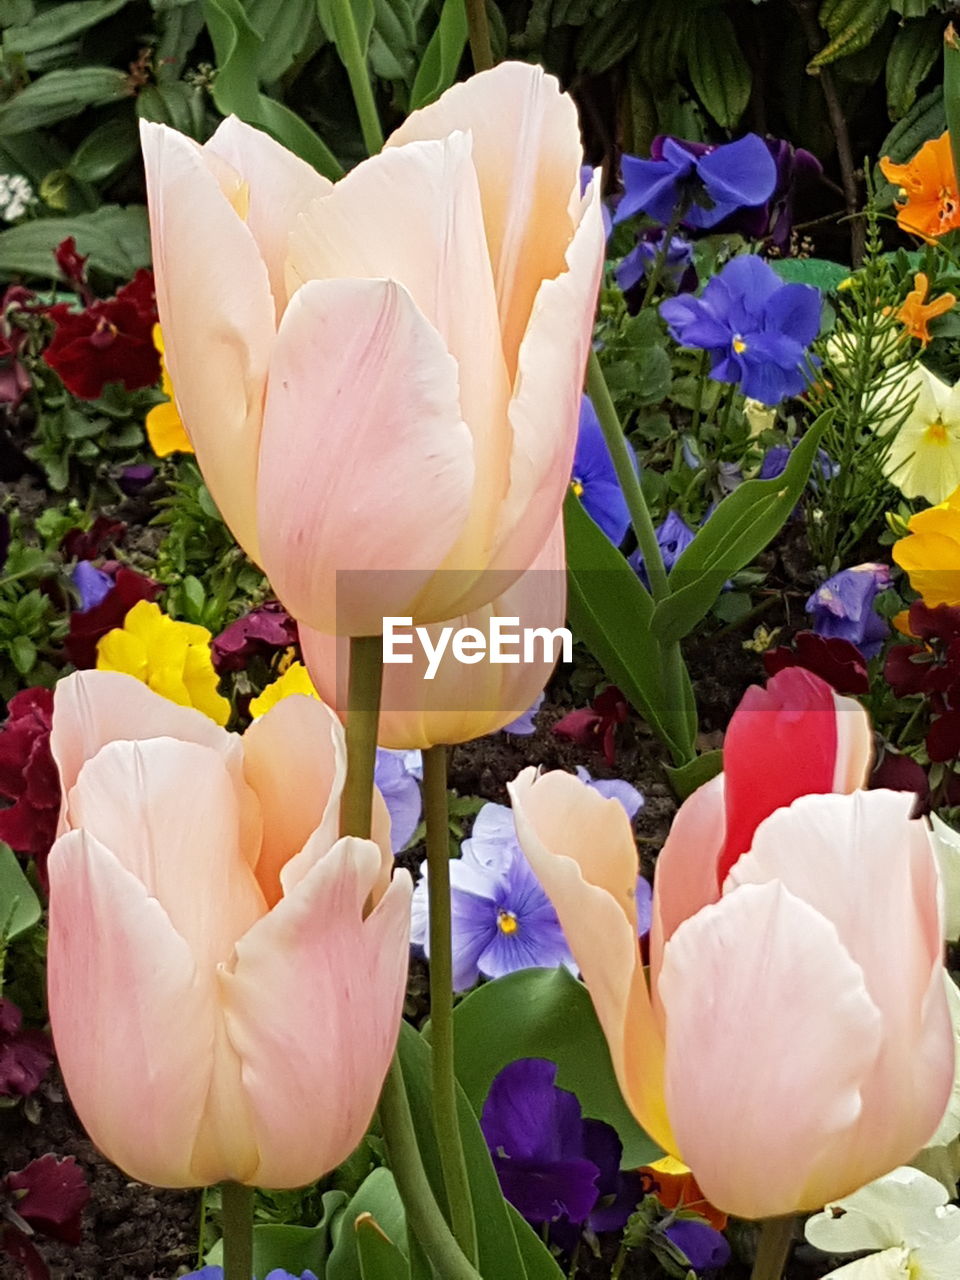 CLOSE-UP OF FRESH TULIPS BLOOMING IN PARK